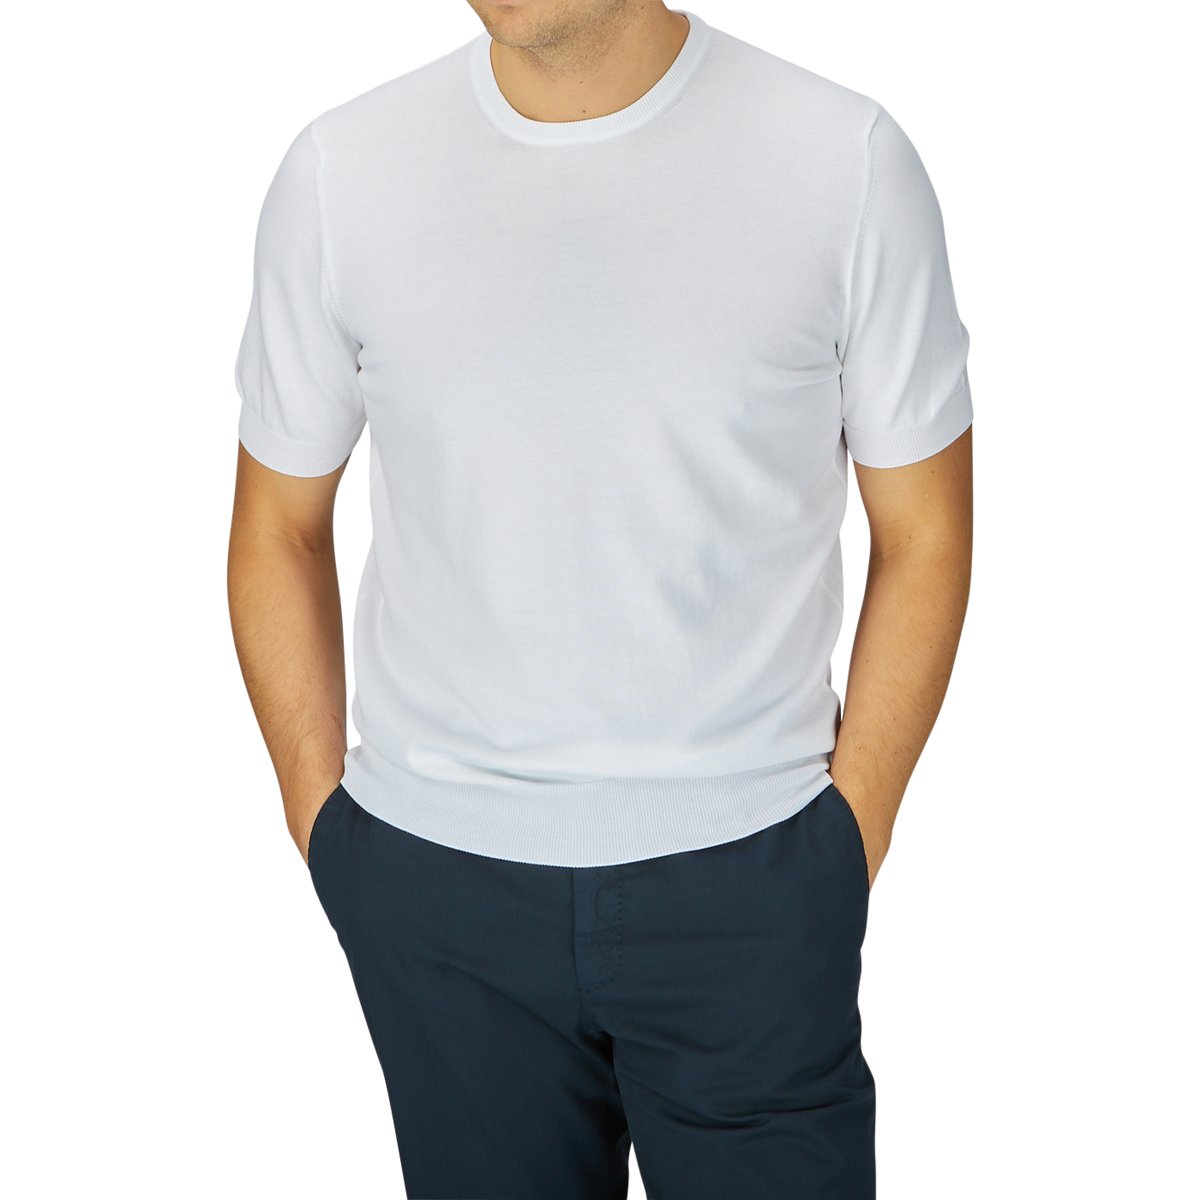 A man wearing a Gran Sasso white organic cotton knitted t-shirt and navy blue pants, standing with his arms slightly away from his sides.